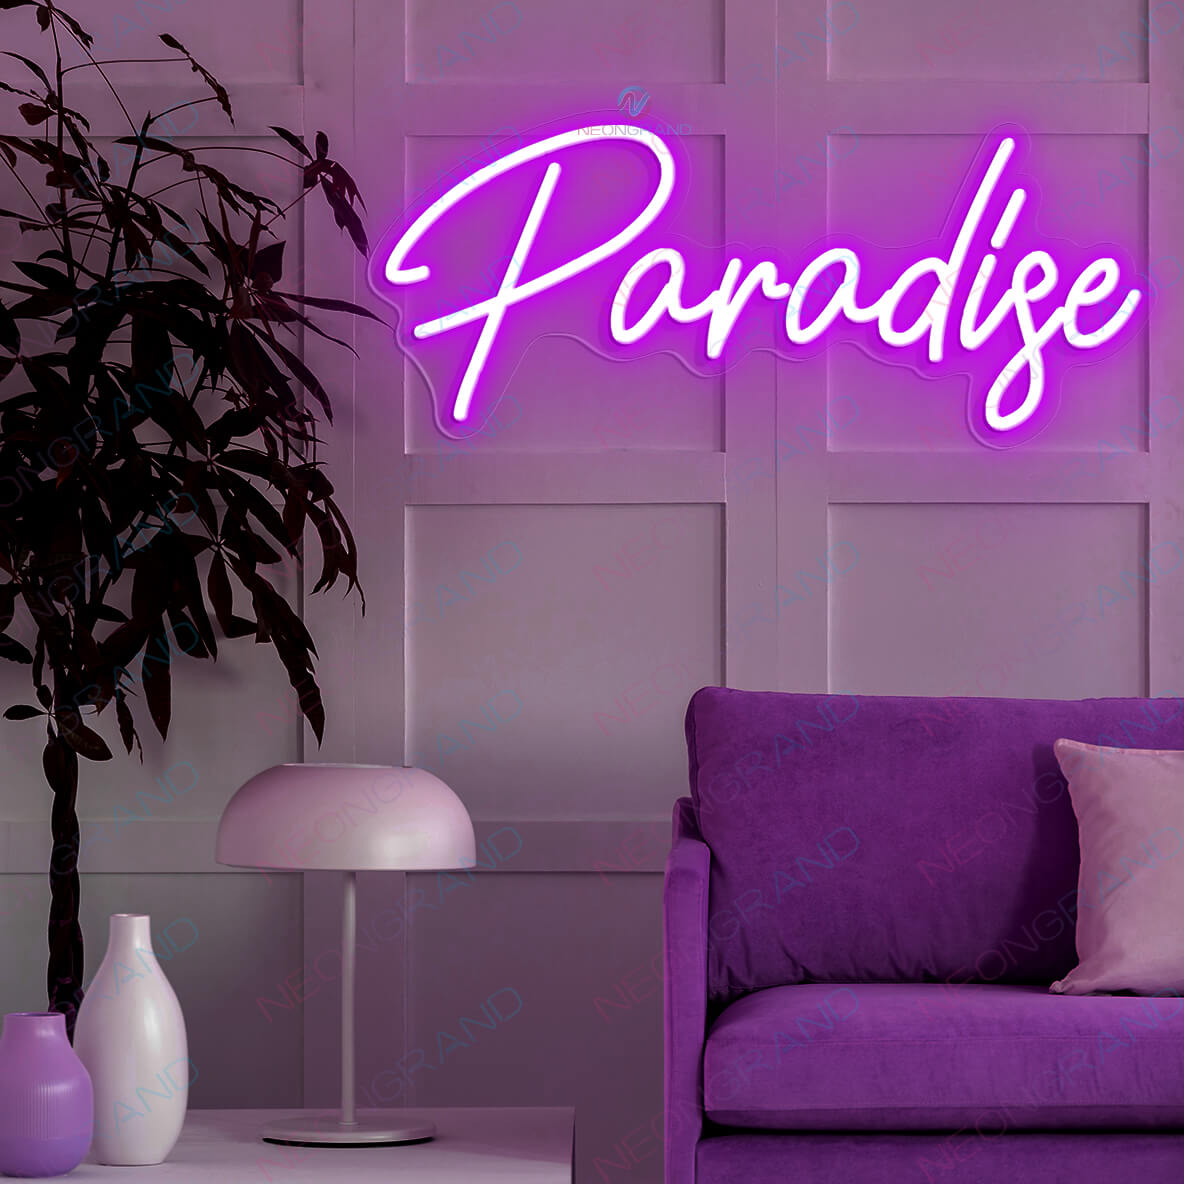 Paradise Neon Sign Bedroom Led Light Up Sign purple